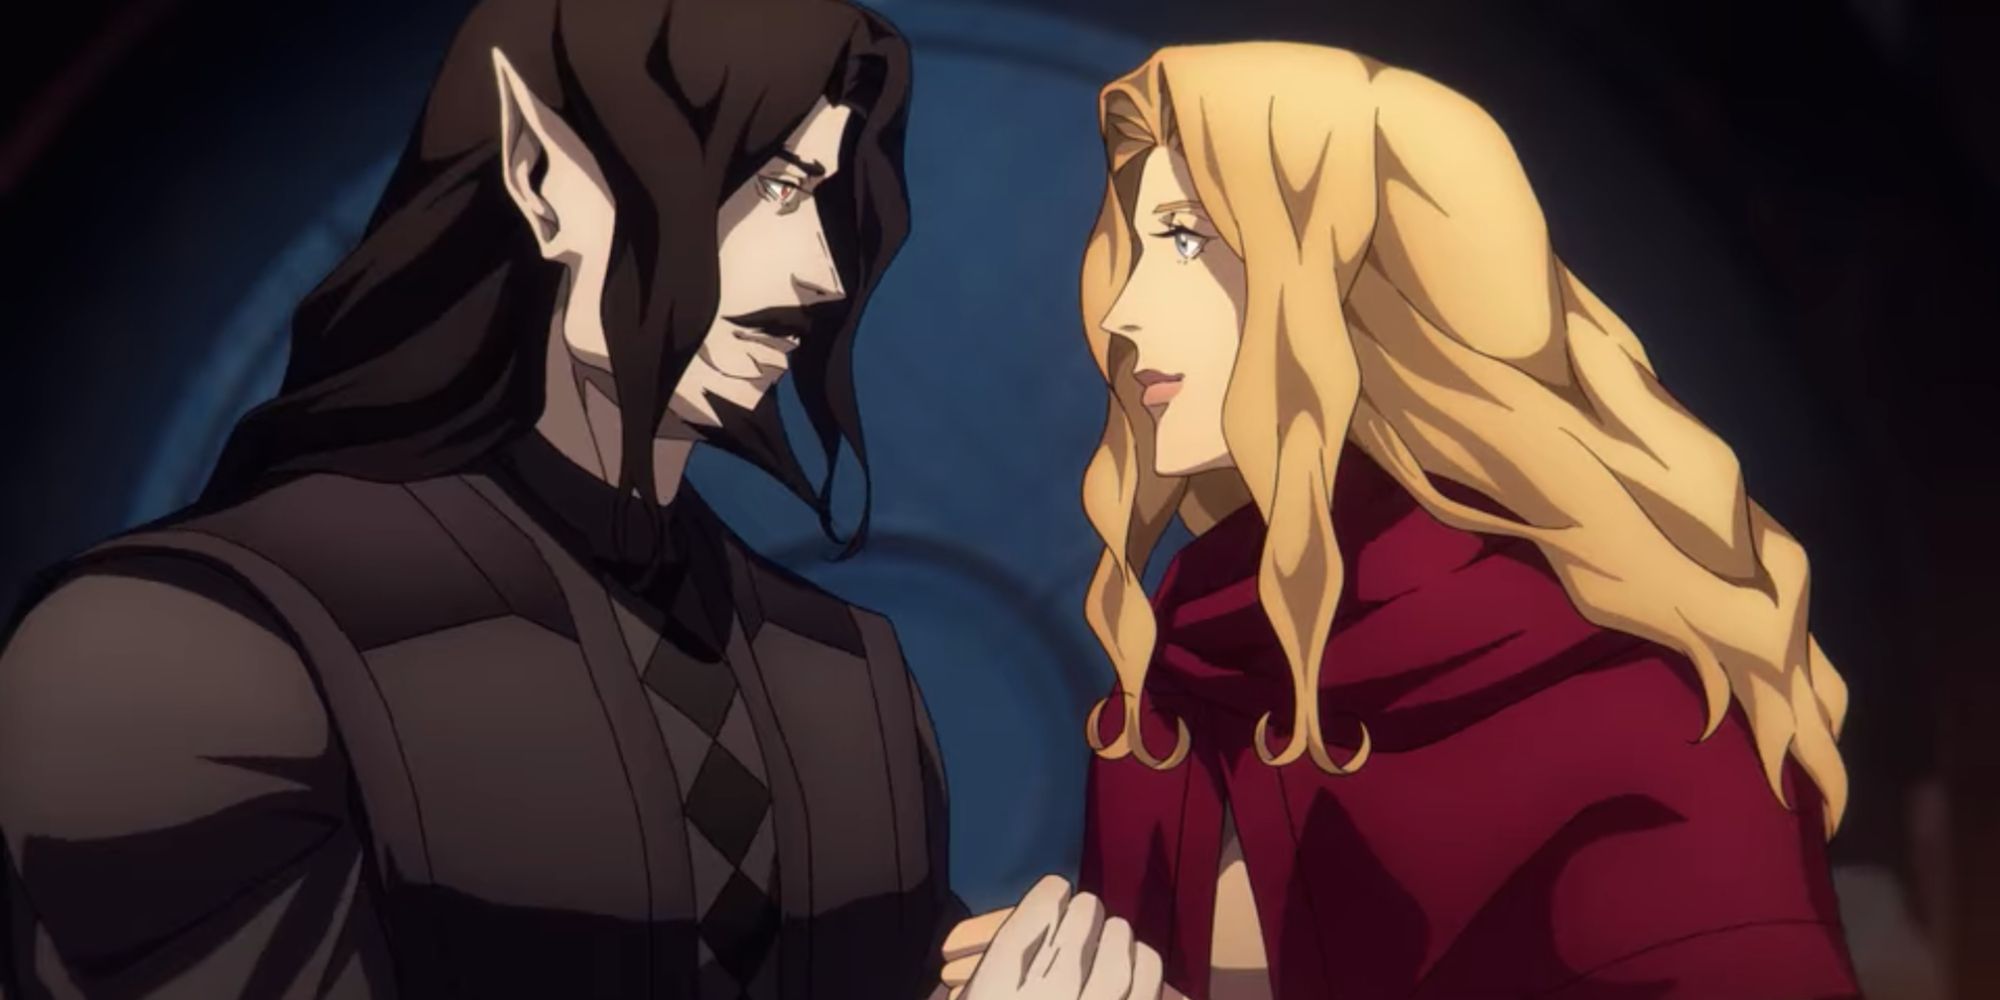 Dracula and Lisa, voiced by Graham McTavish and Emily Swallow, hold hands and stare into each other's eyes in Castlevania